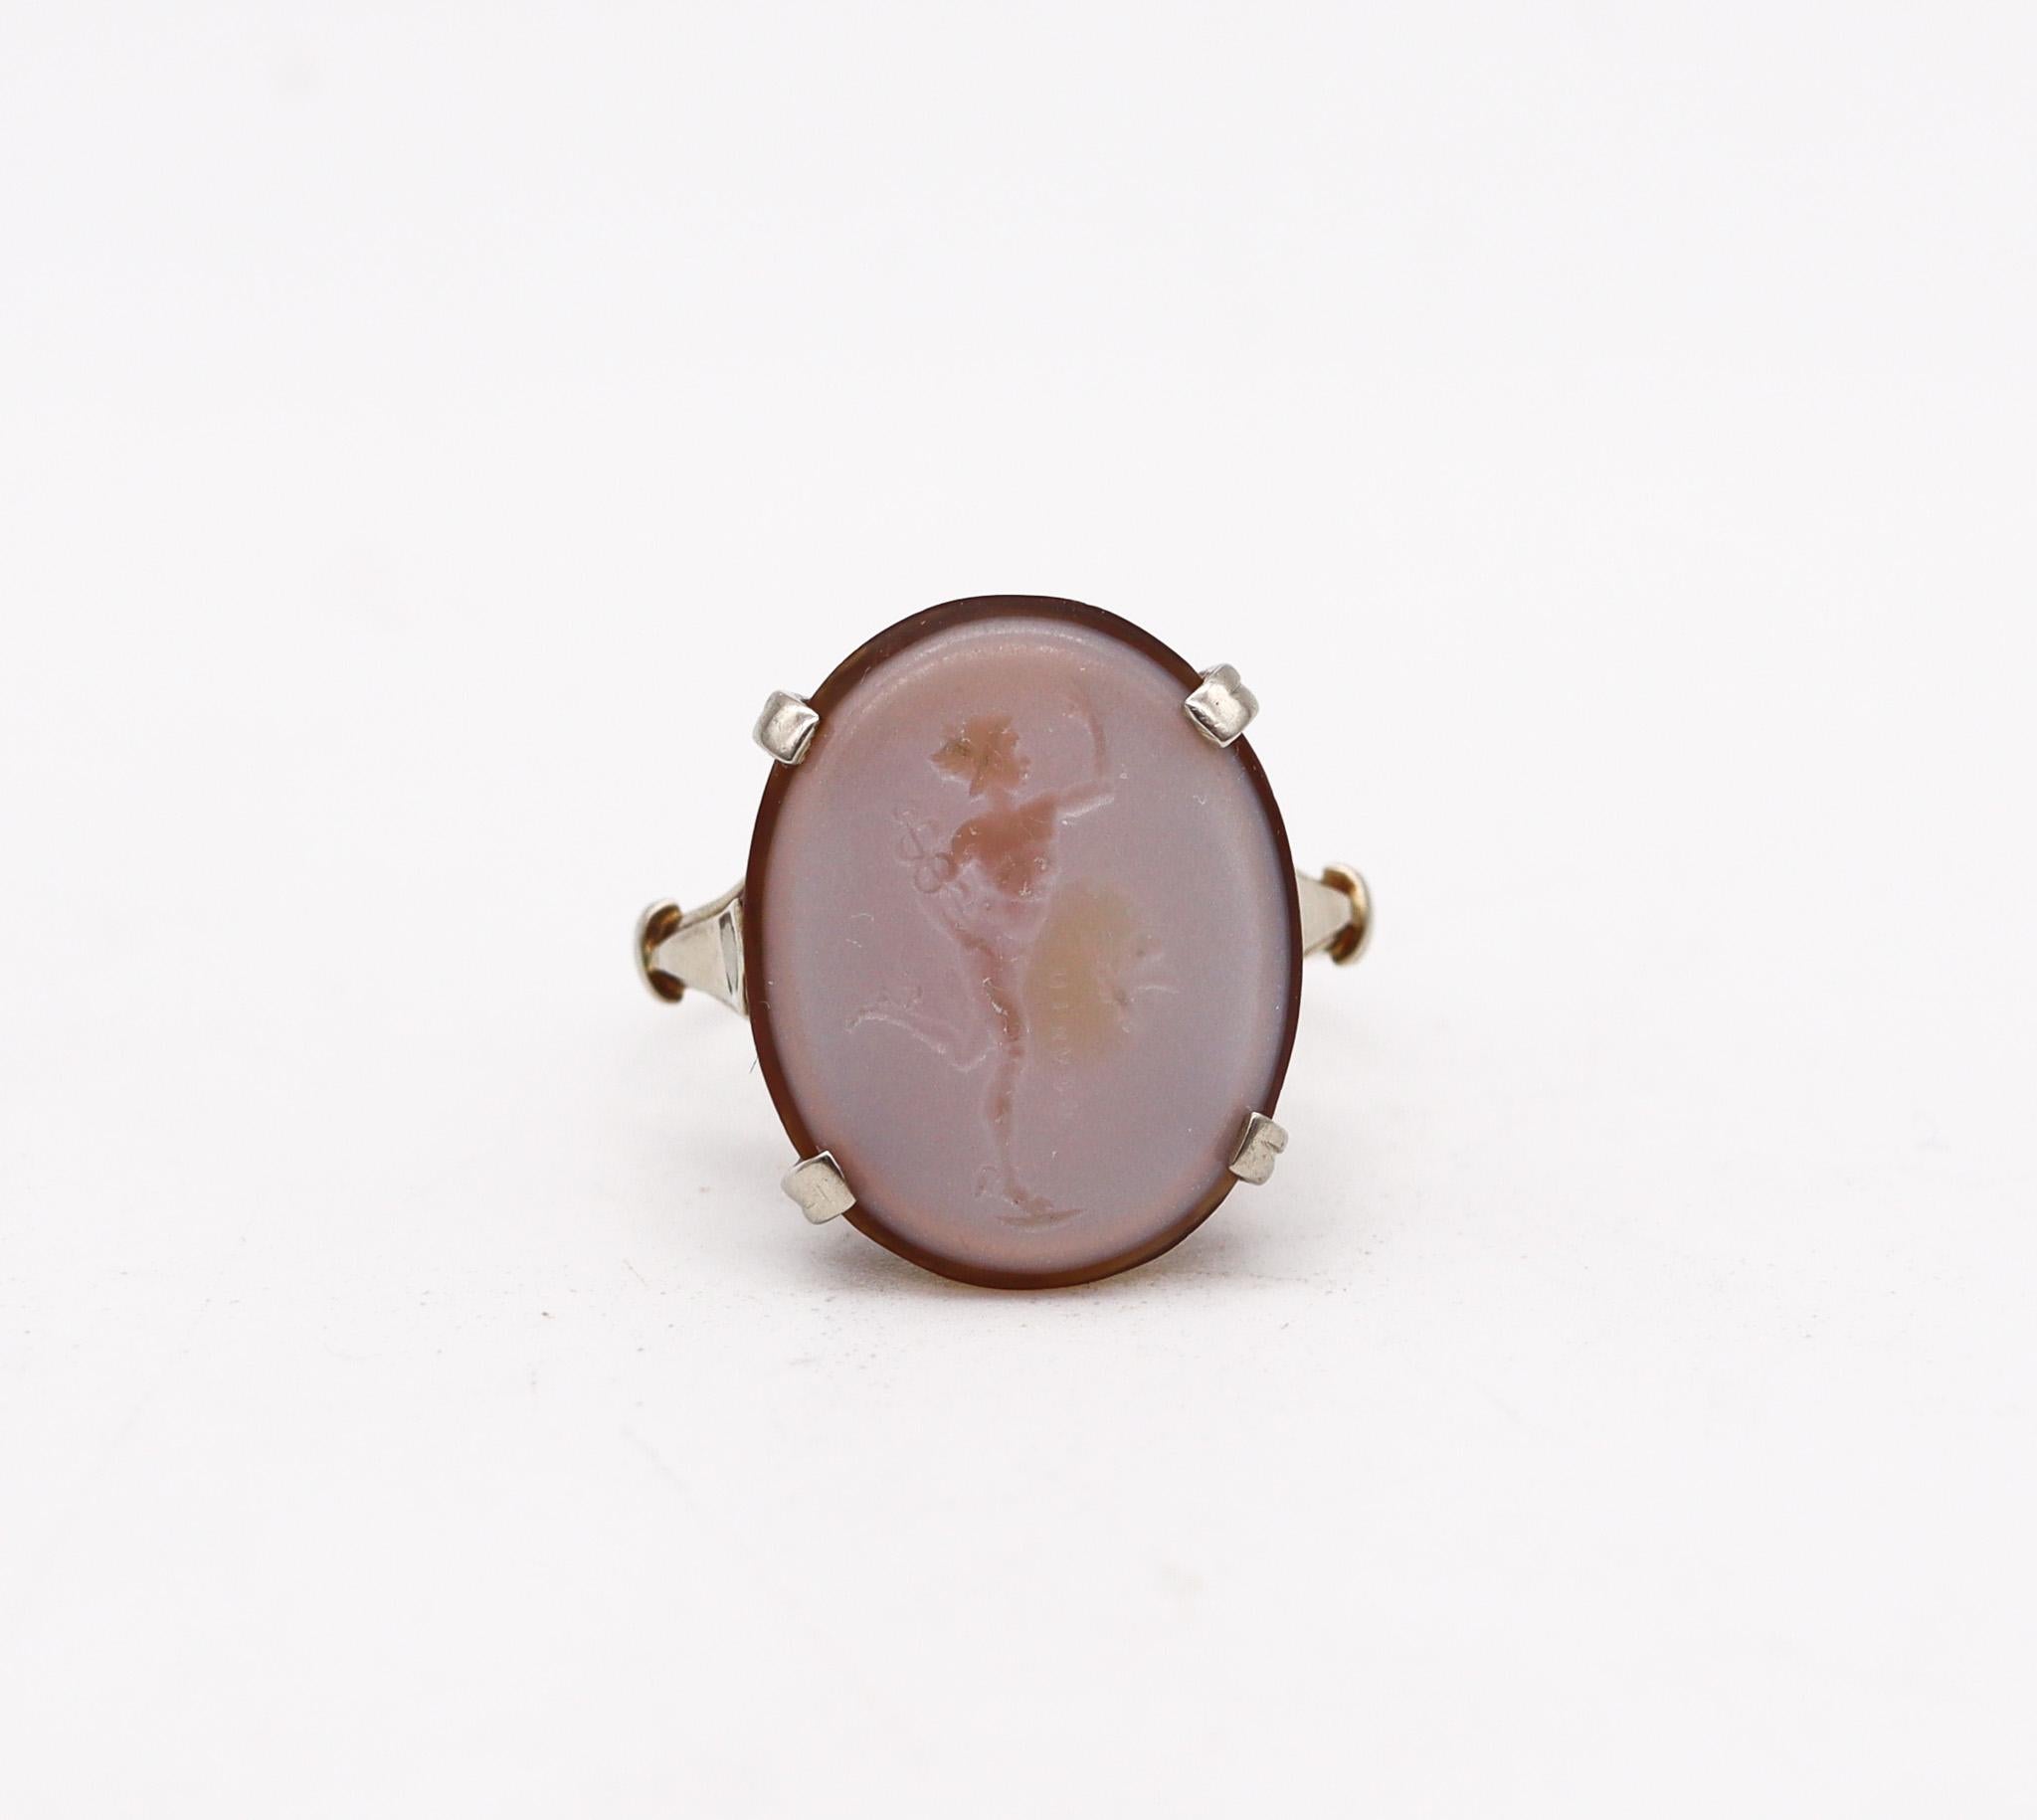 Important carved intaglio ring by Giovanni or Luigi Pichler (1773-1854).

An extremely rare intaglio seal piece, created in Rome Italy by the Pichler's Atelier in the late early 18th century, circa 1795. It was carved in an oval cabochon cut shape,